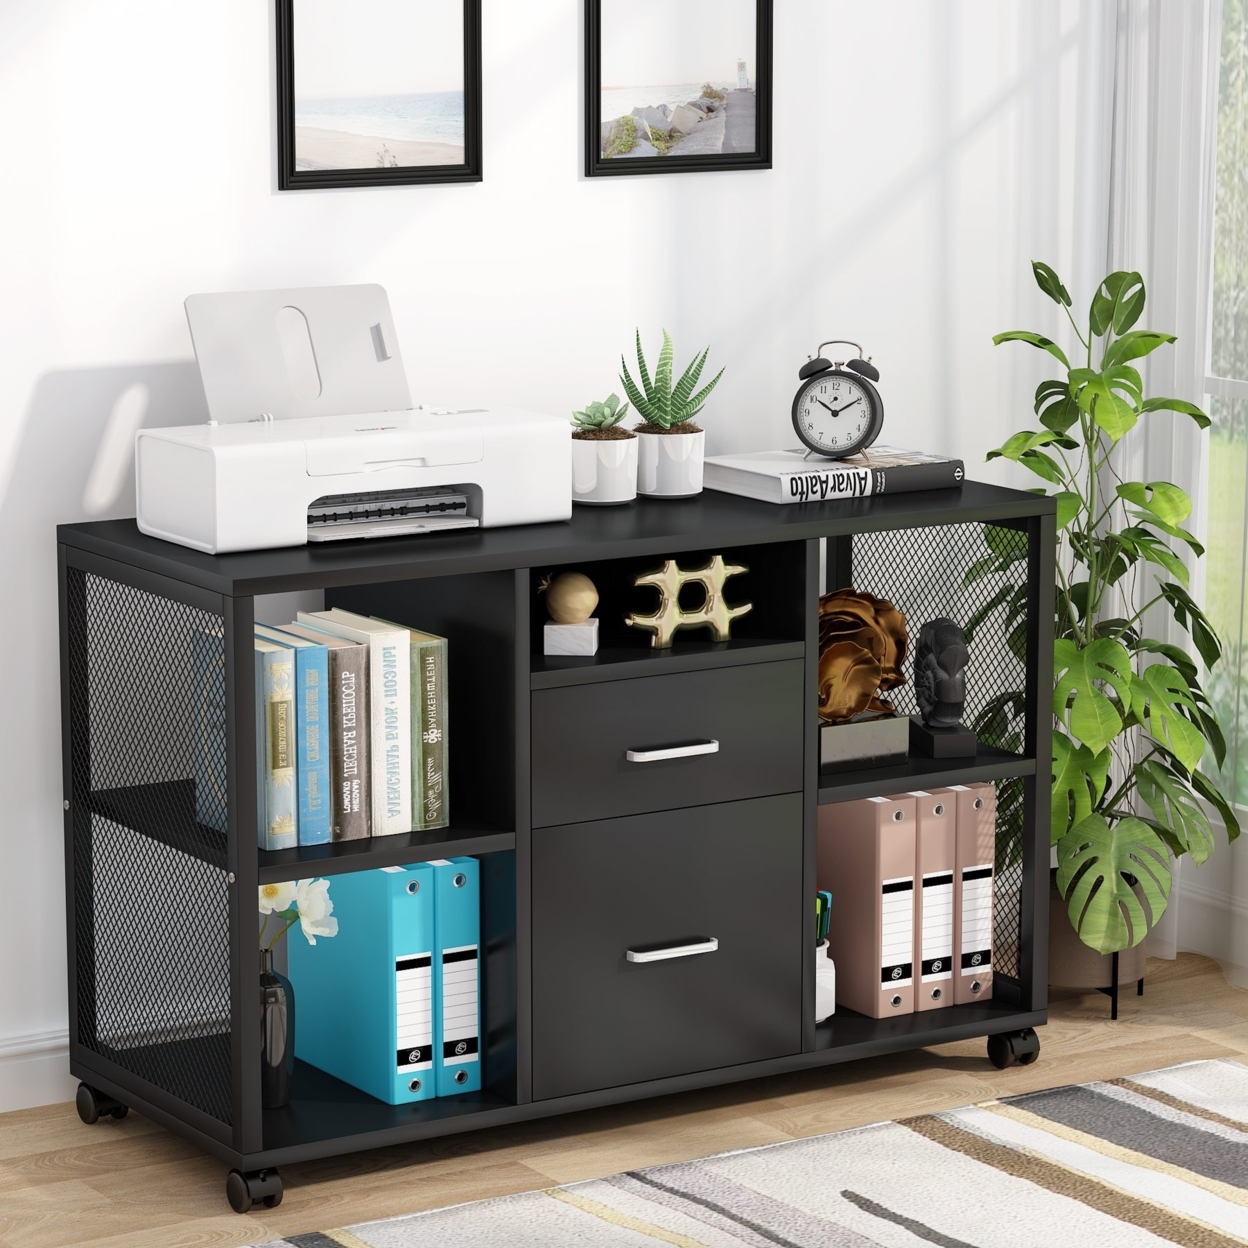 File Cabinet, Tribesigns 2-Drawer Filing Cabinets Organizers, Modern Lateral Mobile Letter Size File Storage Cabinets